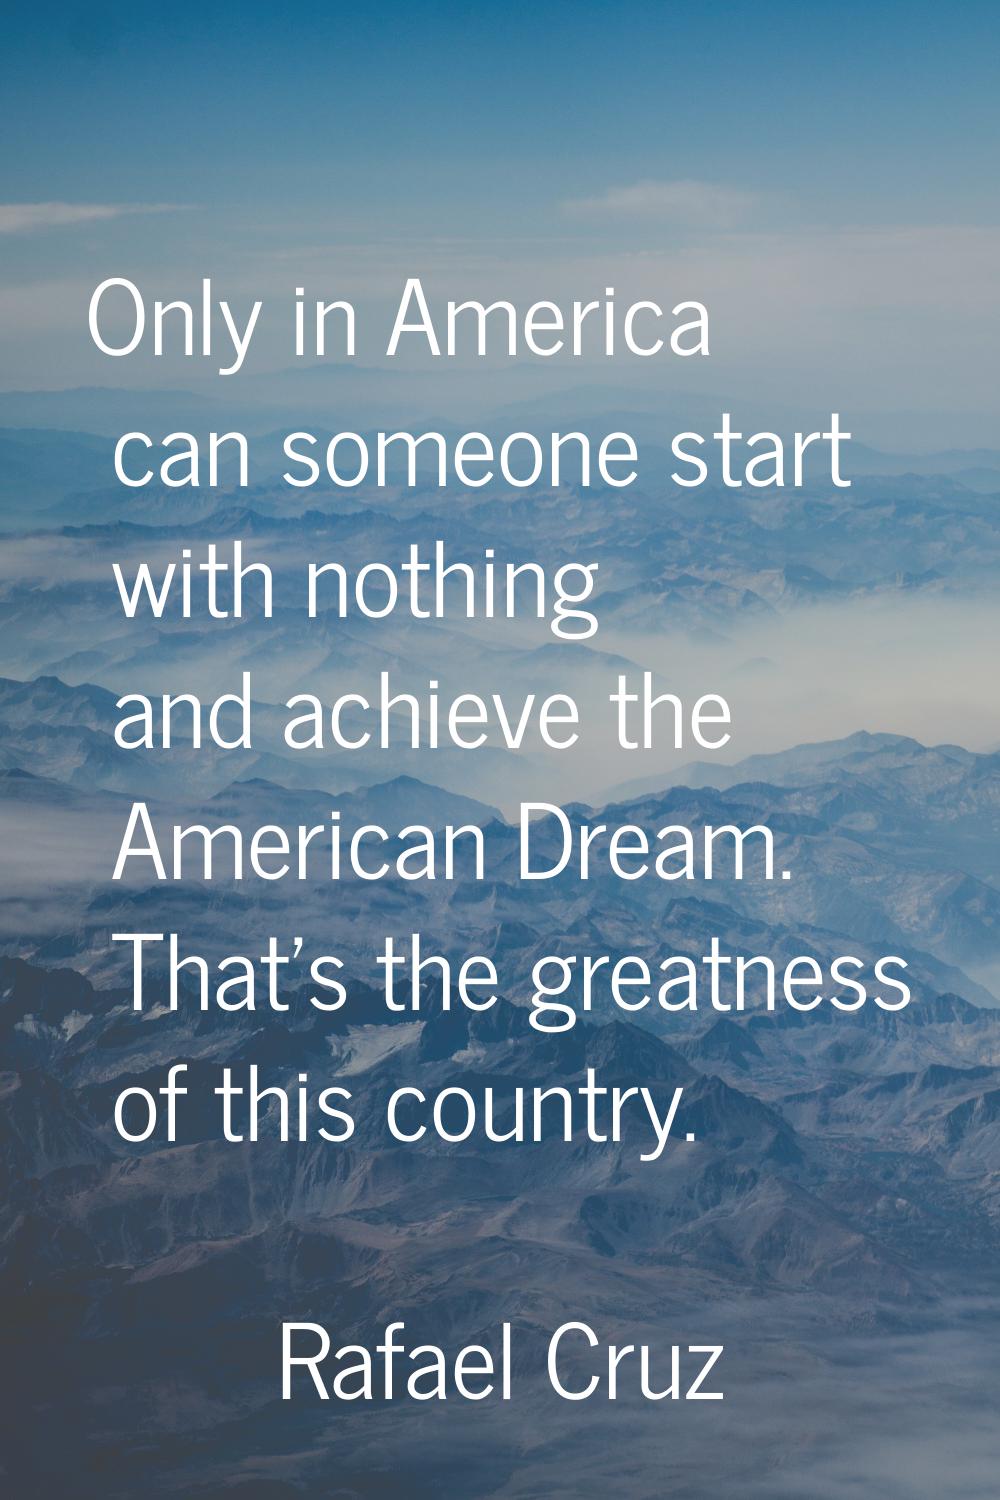 Only in America can someone start with nothing and achieve the American Dream. That's the greatness